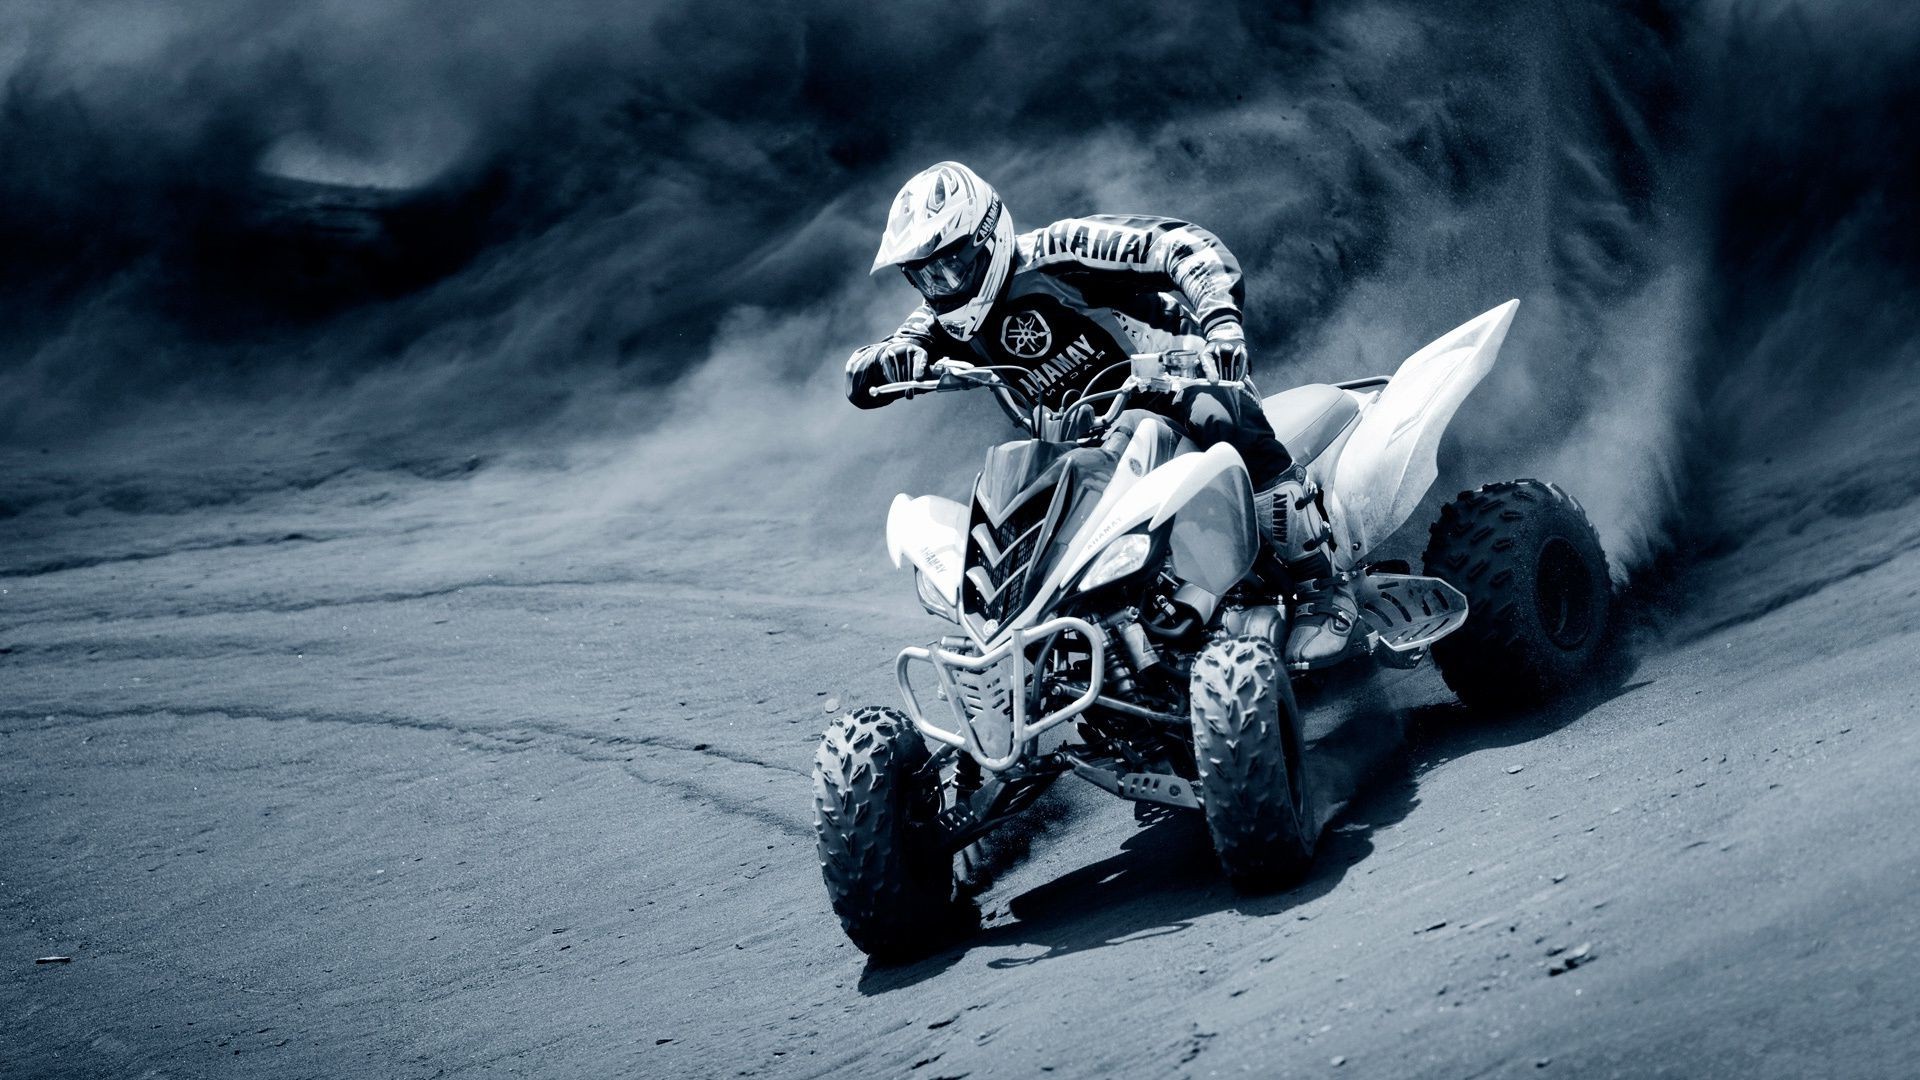 atvs bike race hurry vehicle motorbike competition action drive track monochrome